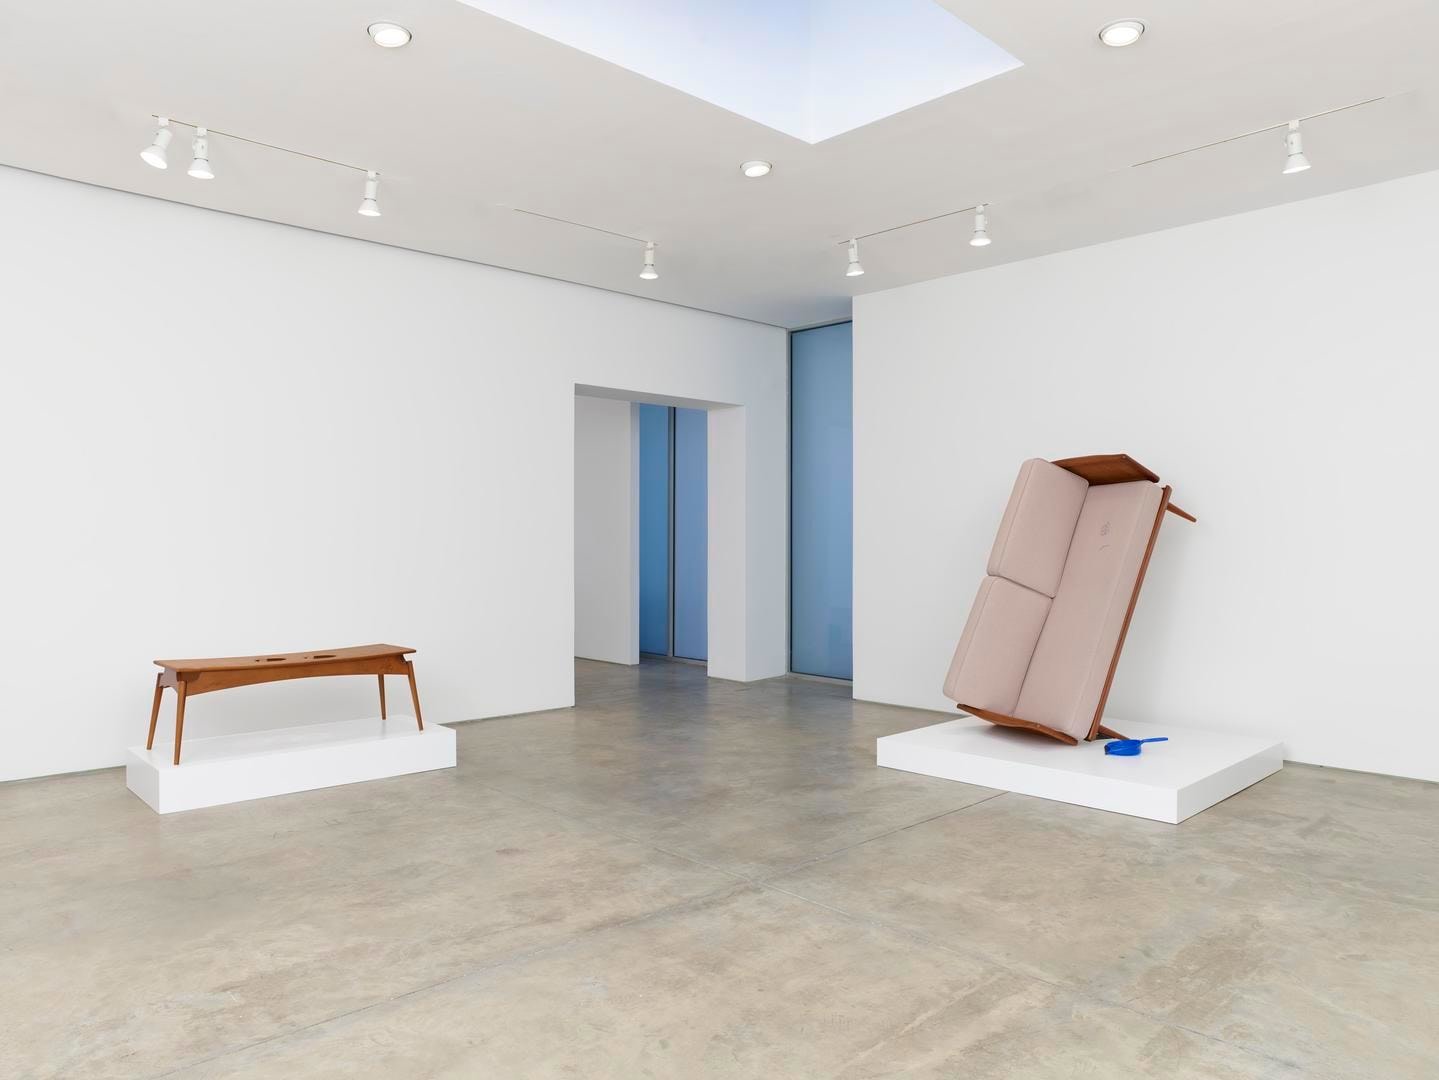 Erwin Wurm, Ethics demonstrated in geometrical order installation view 4